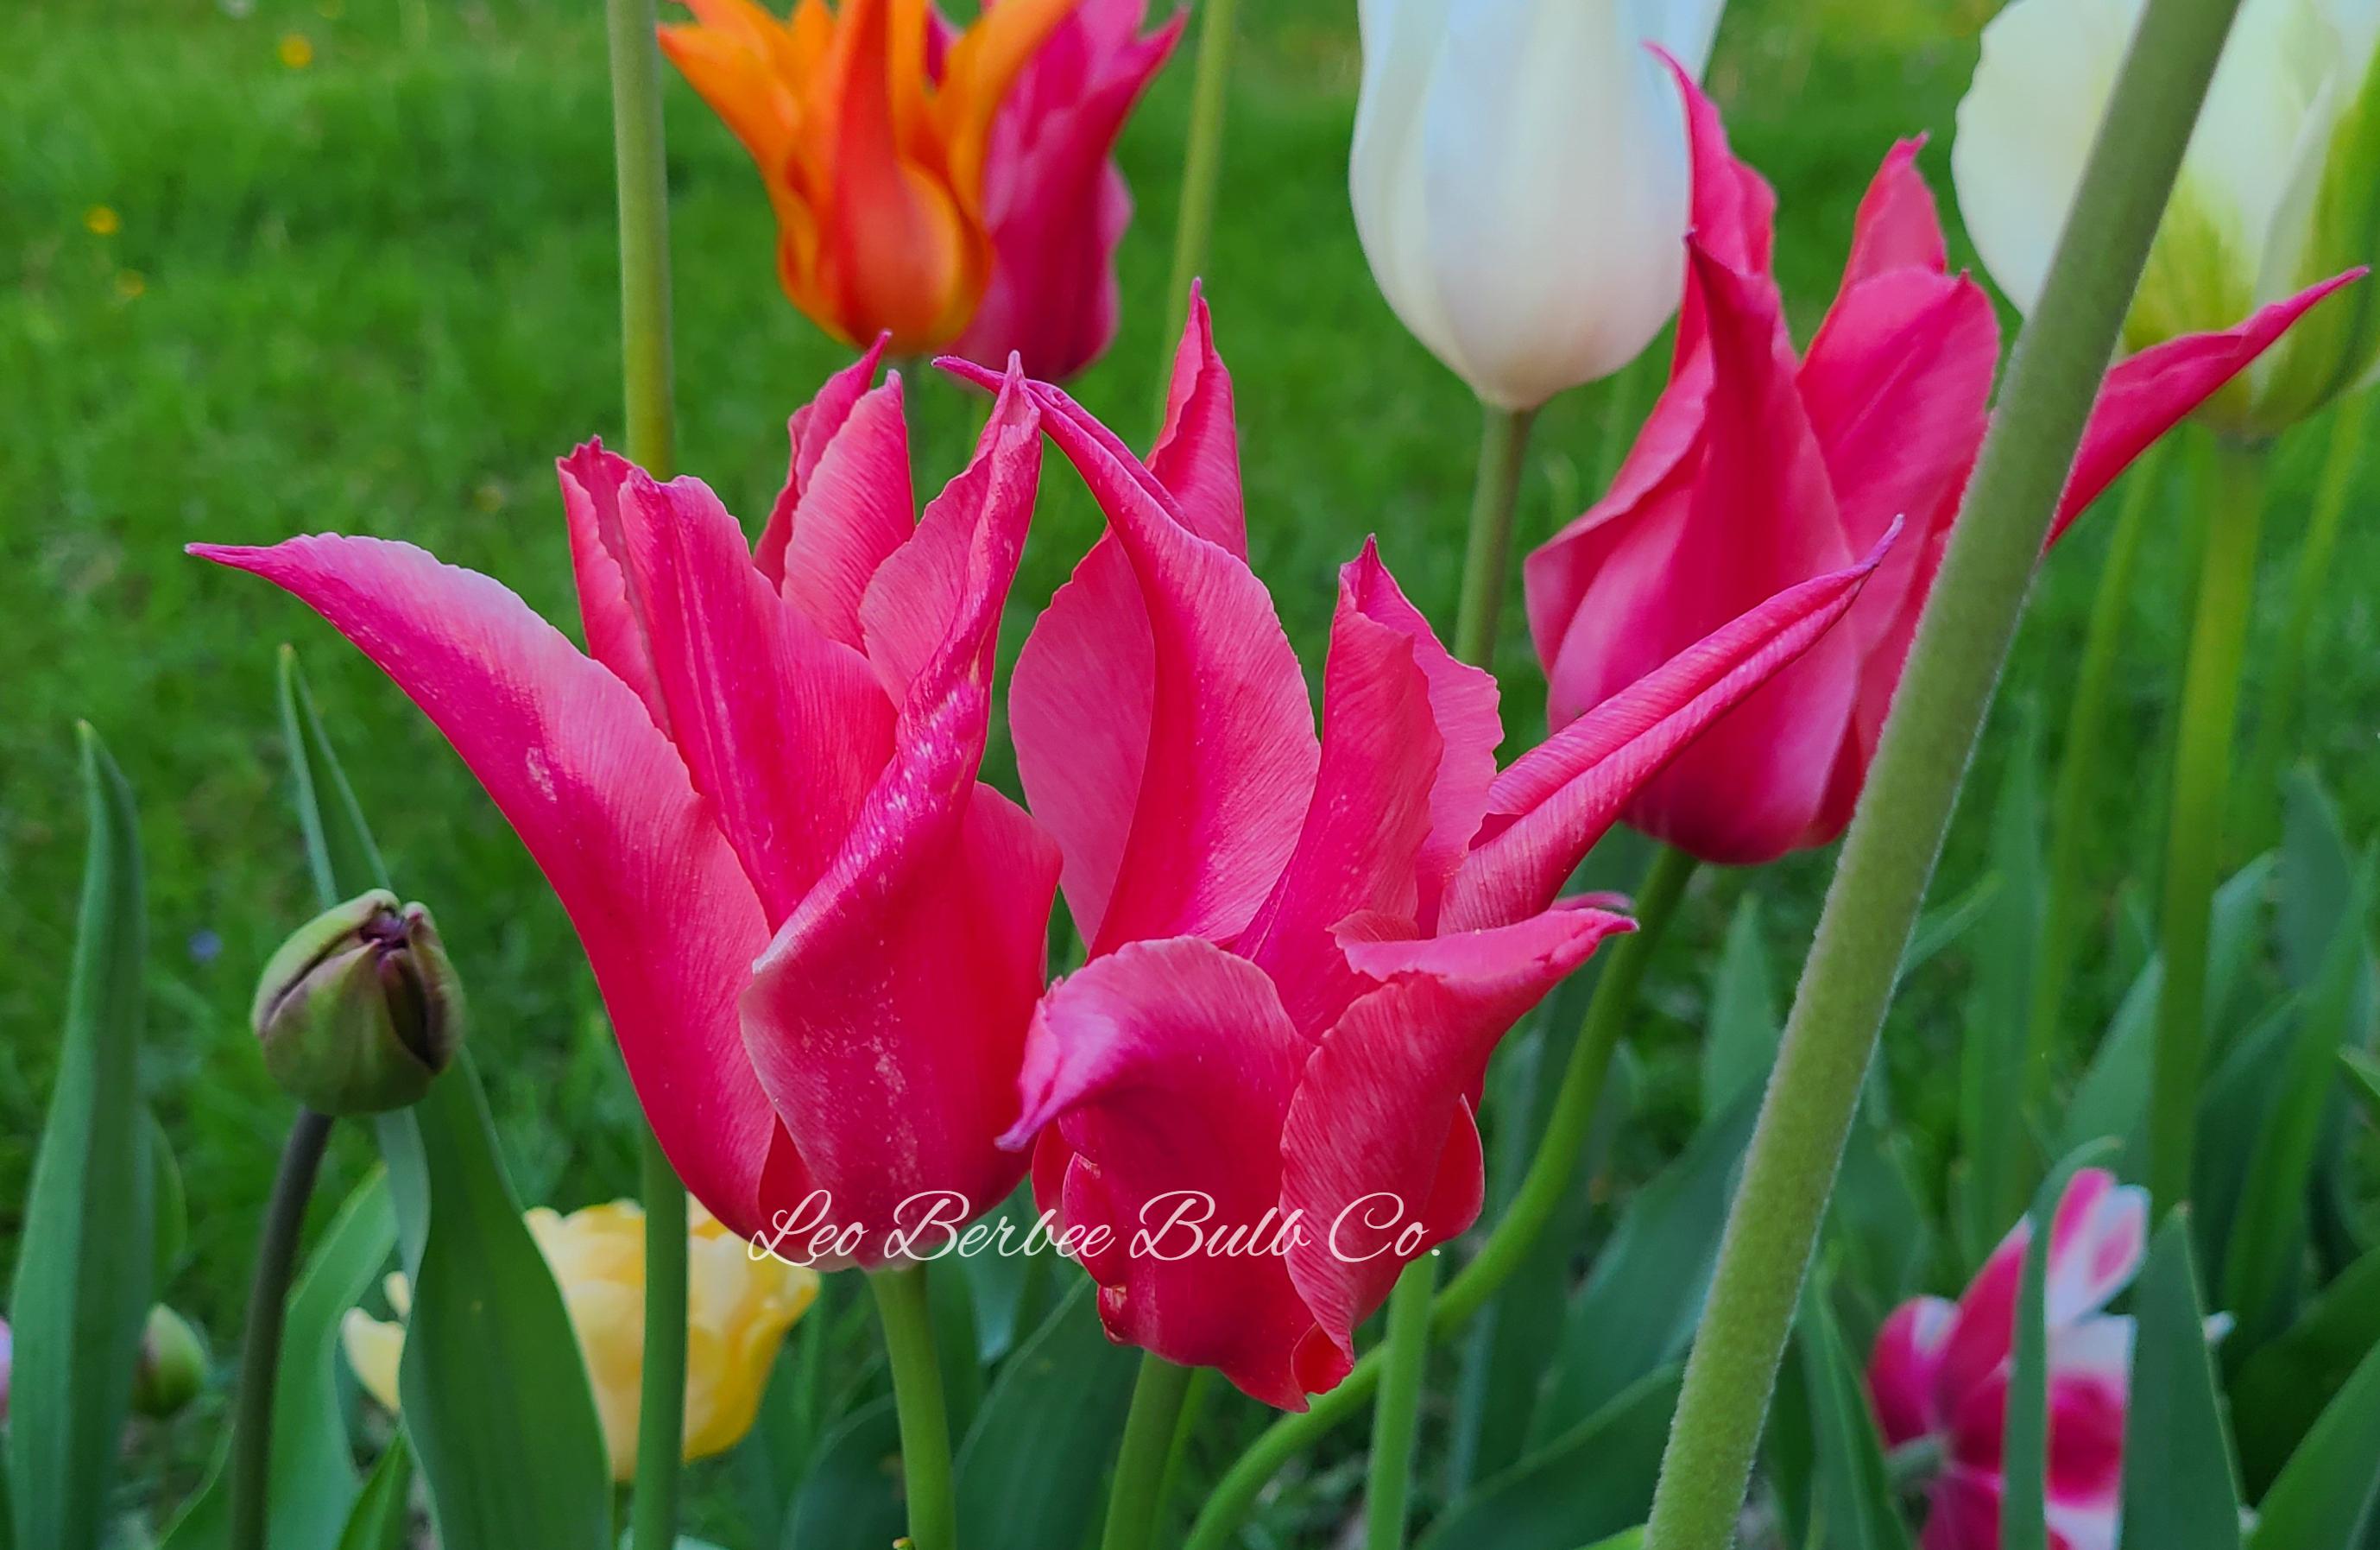 Tulip Lily Flowering 'Mariette' - Tulip from Leo Berbee Bulb Company